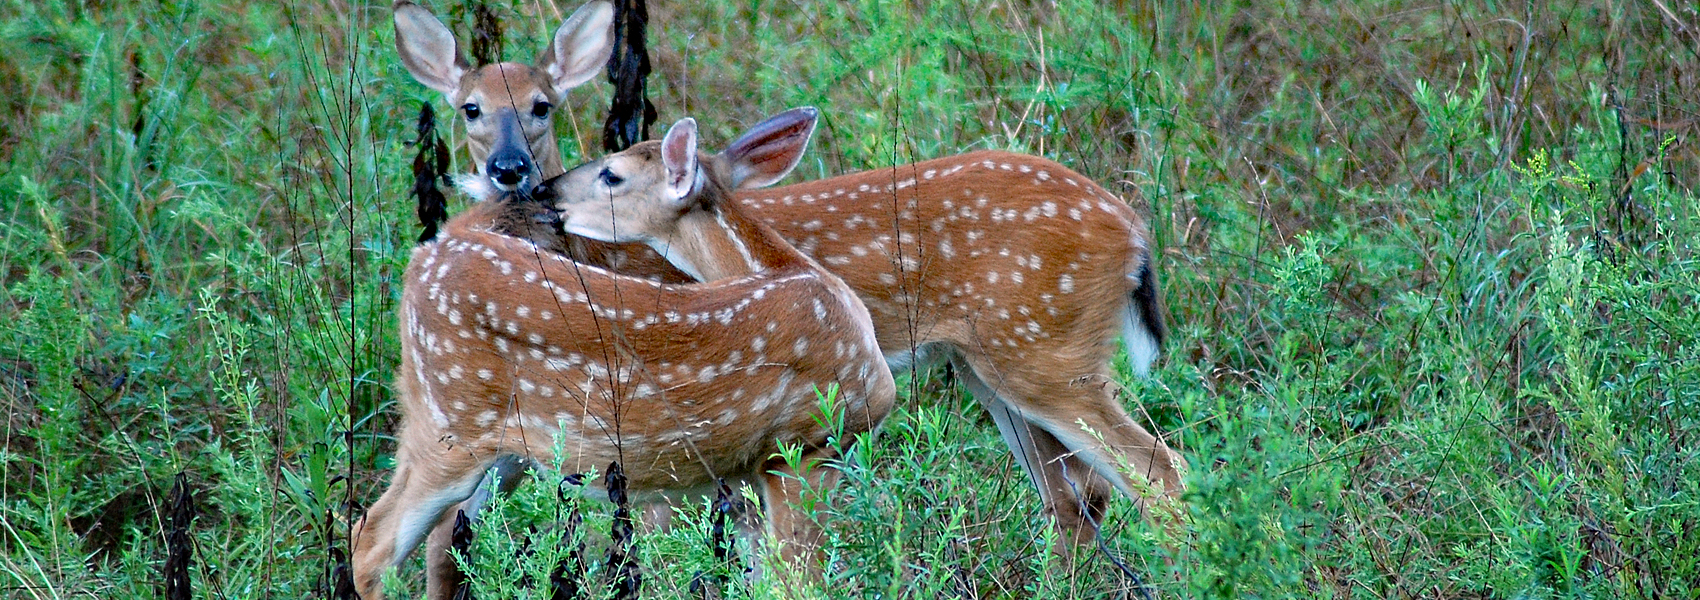 Two White-tail deer fawns play in a field